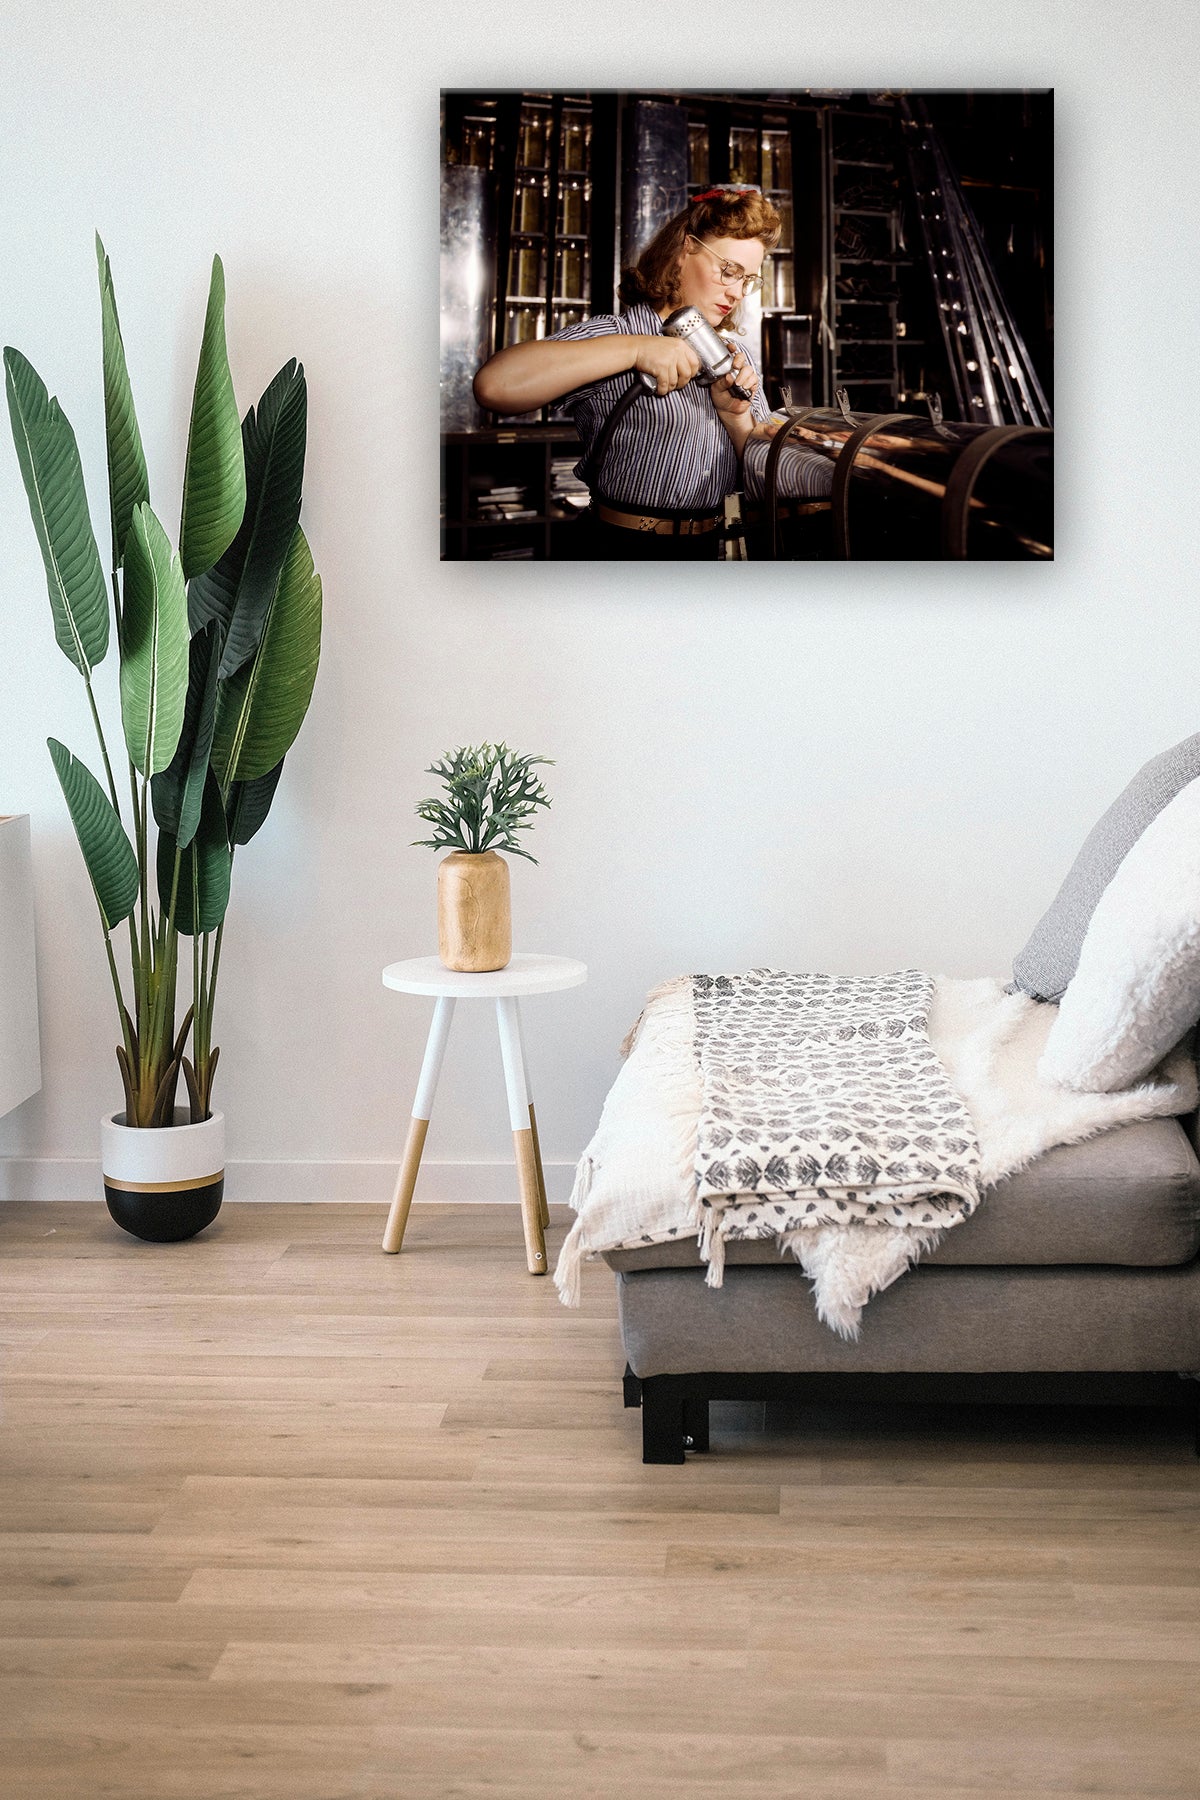 A digital mockup of a canvas print hanging on a wall, featuring a vintage photograph of a woman operating a hand drill